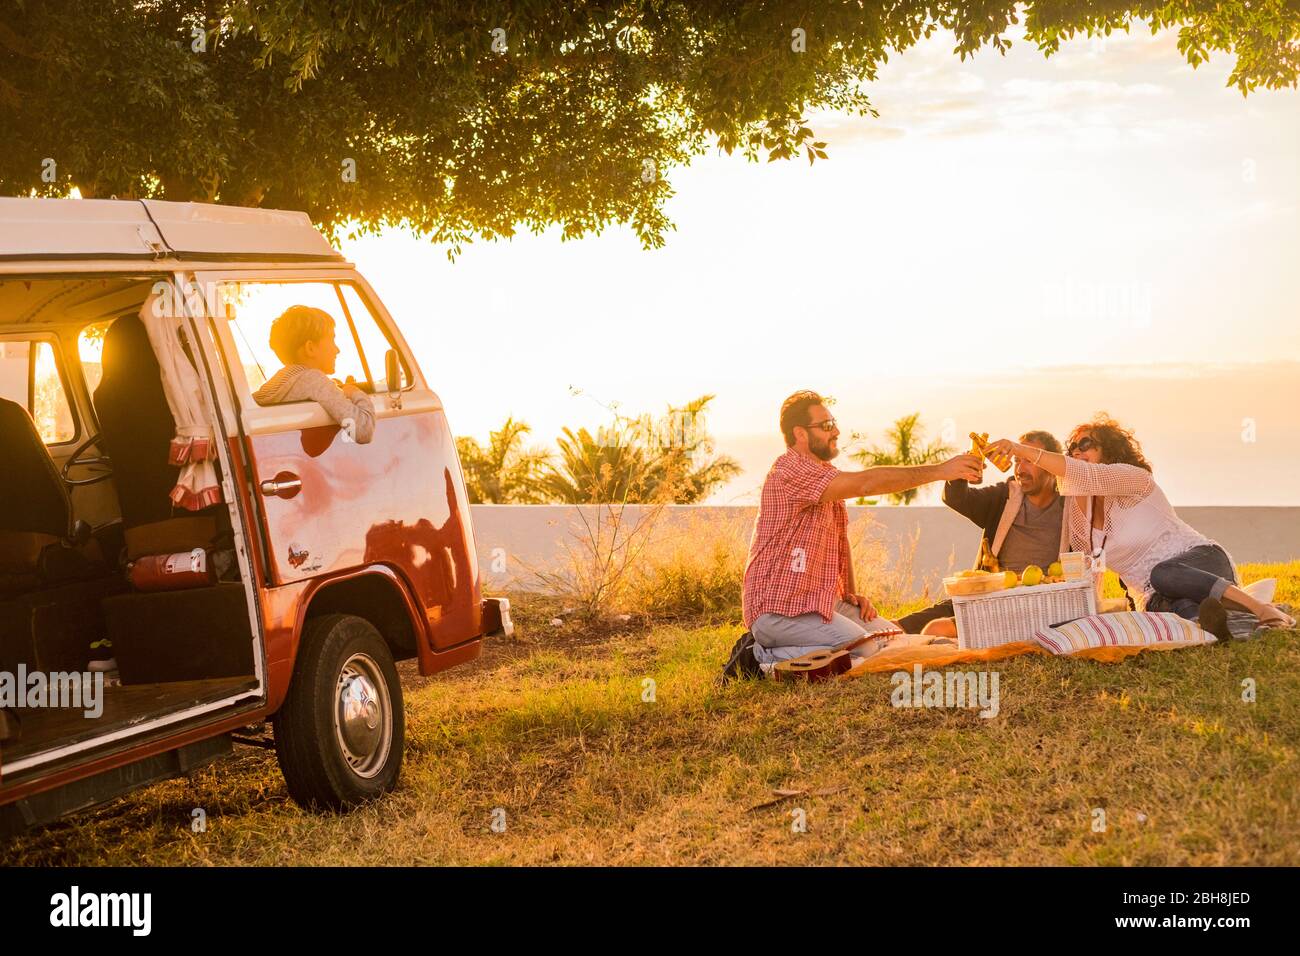 Family and friends all together in picnic leisure activity on a meadow with a red old vintage van parked and son children inside loooking them clinking with some beers during a coloured golden sunset Stock Photo